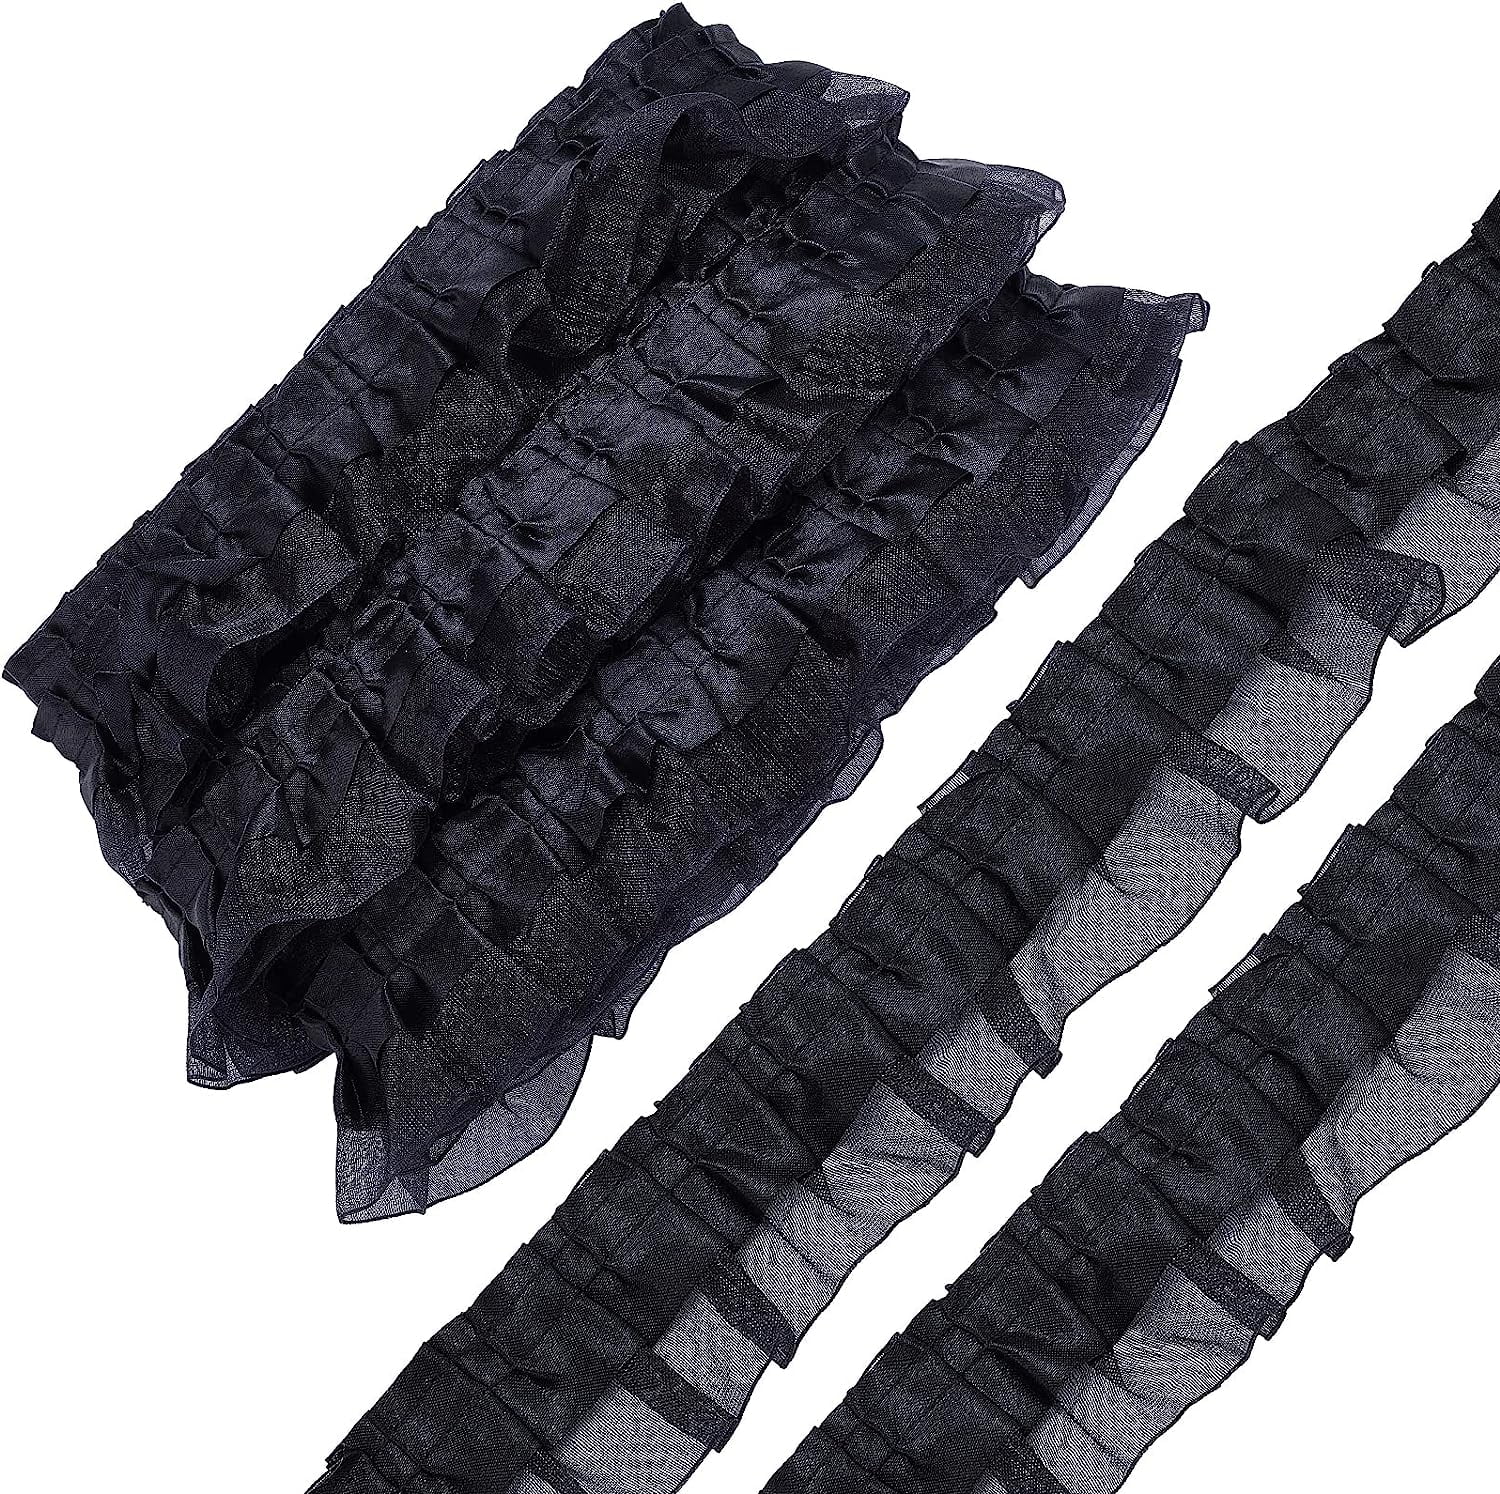 11 Yards Black Double-Layer Pleated Chiffon Lace Trim 2-Layer Gathered Ruffle  Trim Edging Tulle Trimmings Fabric Ribbon 